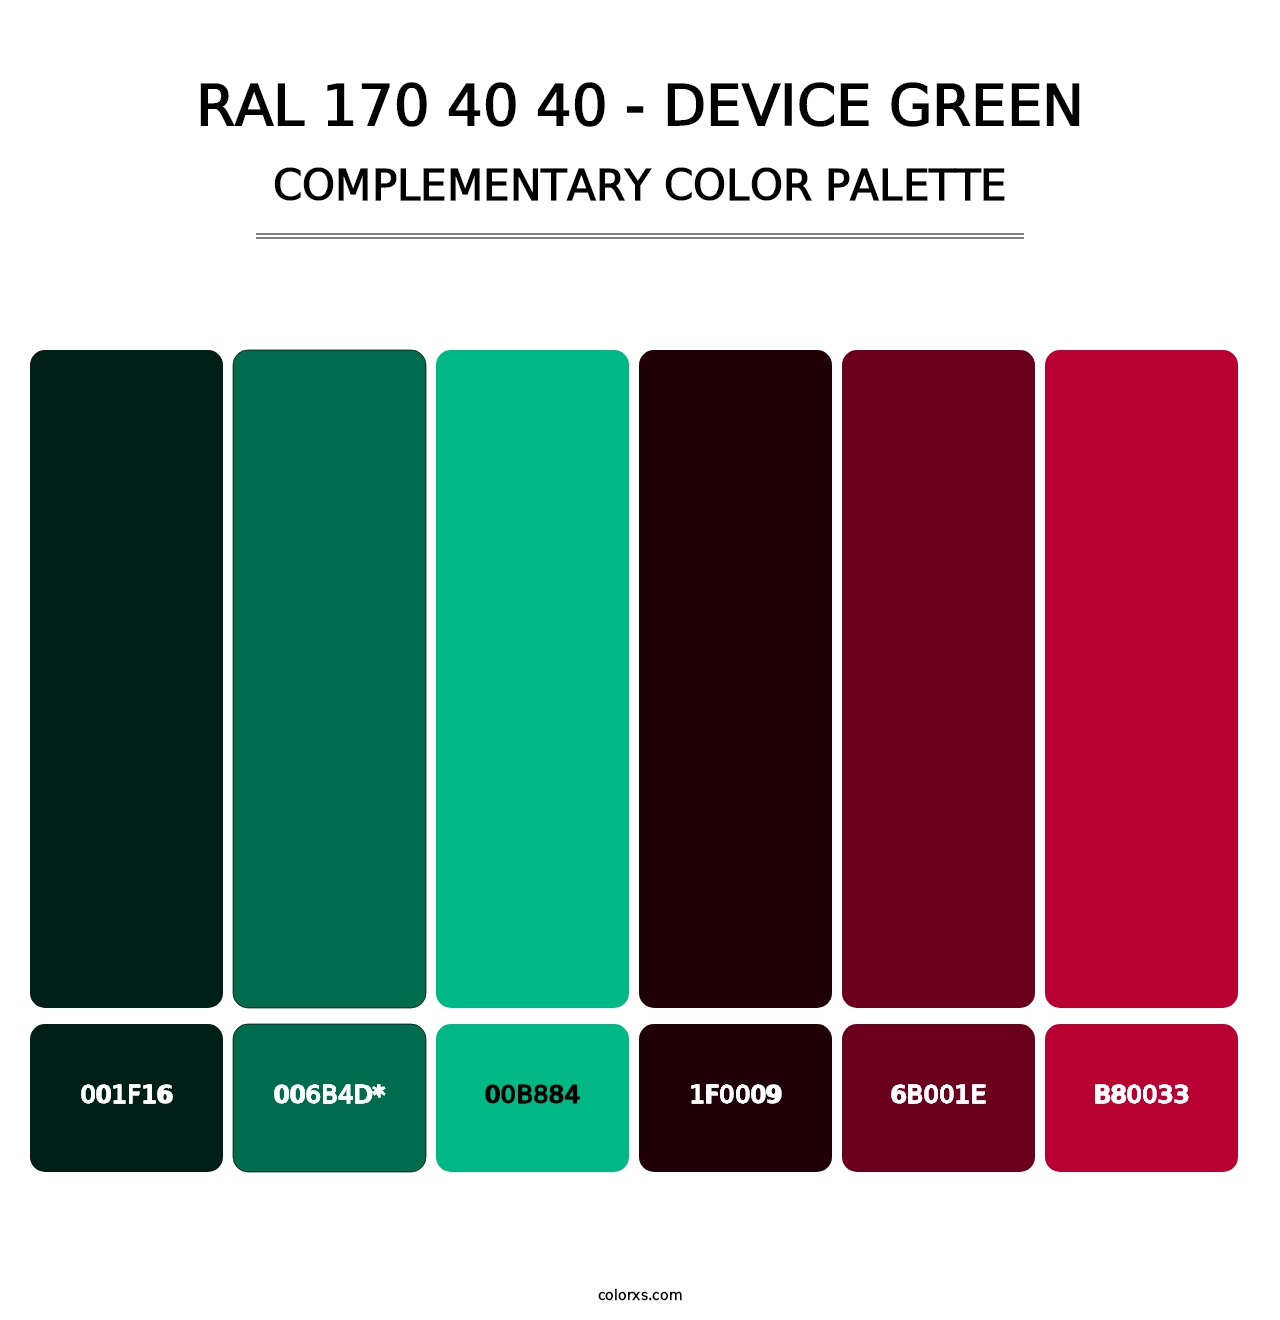 RAL 170 40 40 - Device Green - Complementary Color Palette